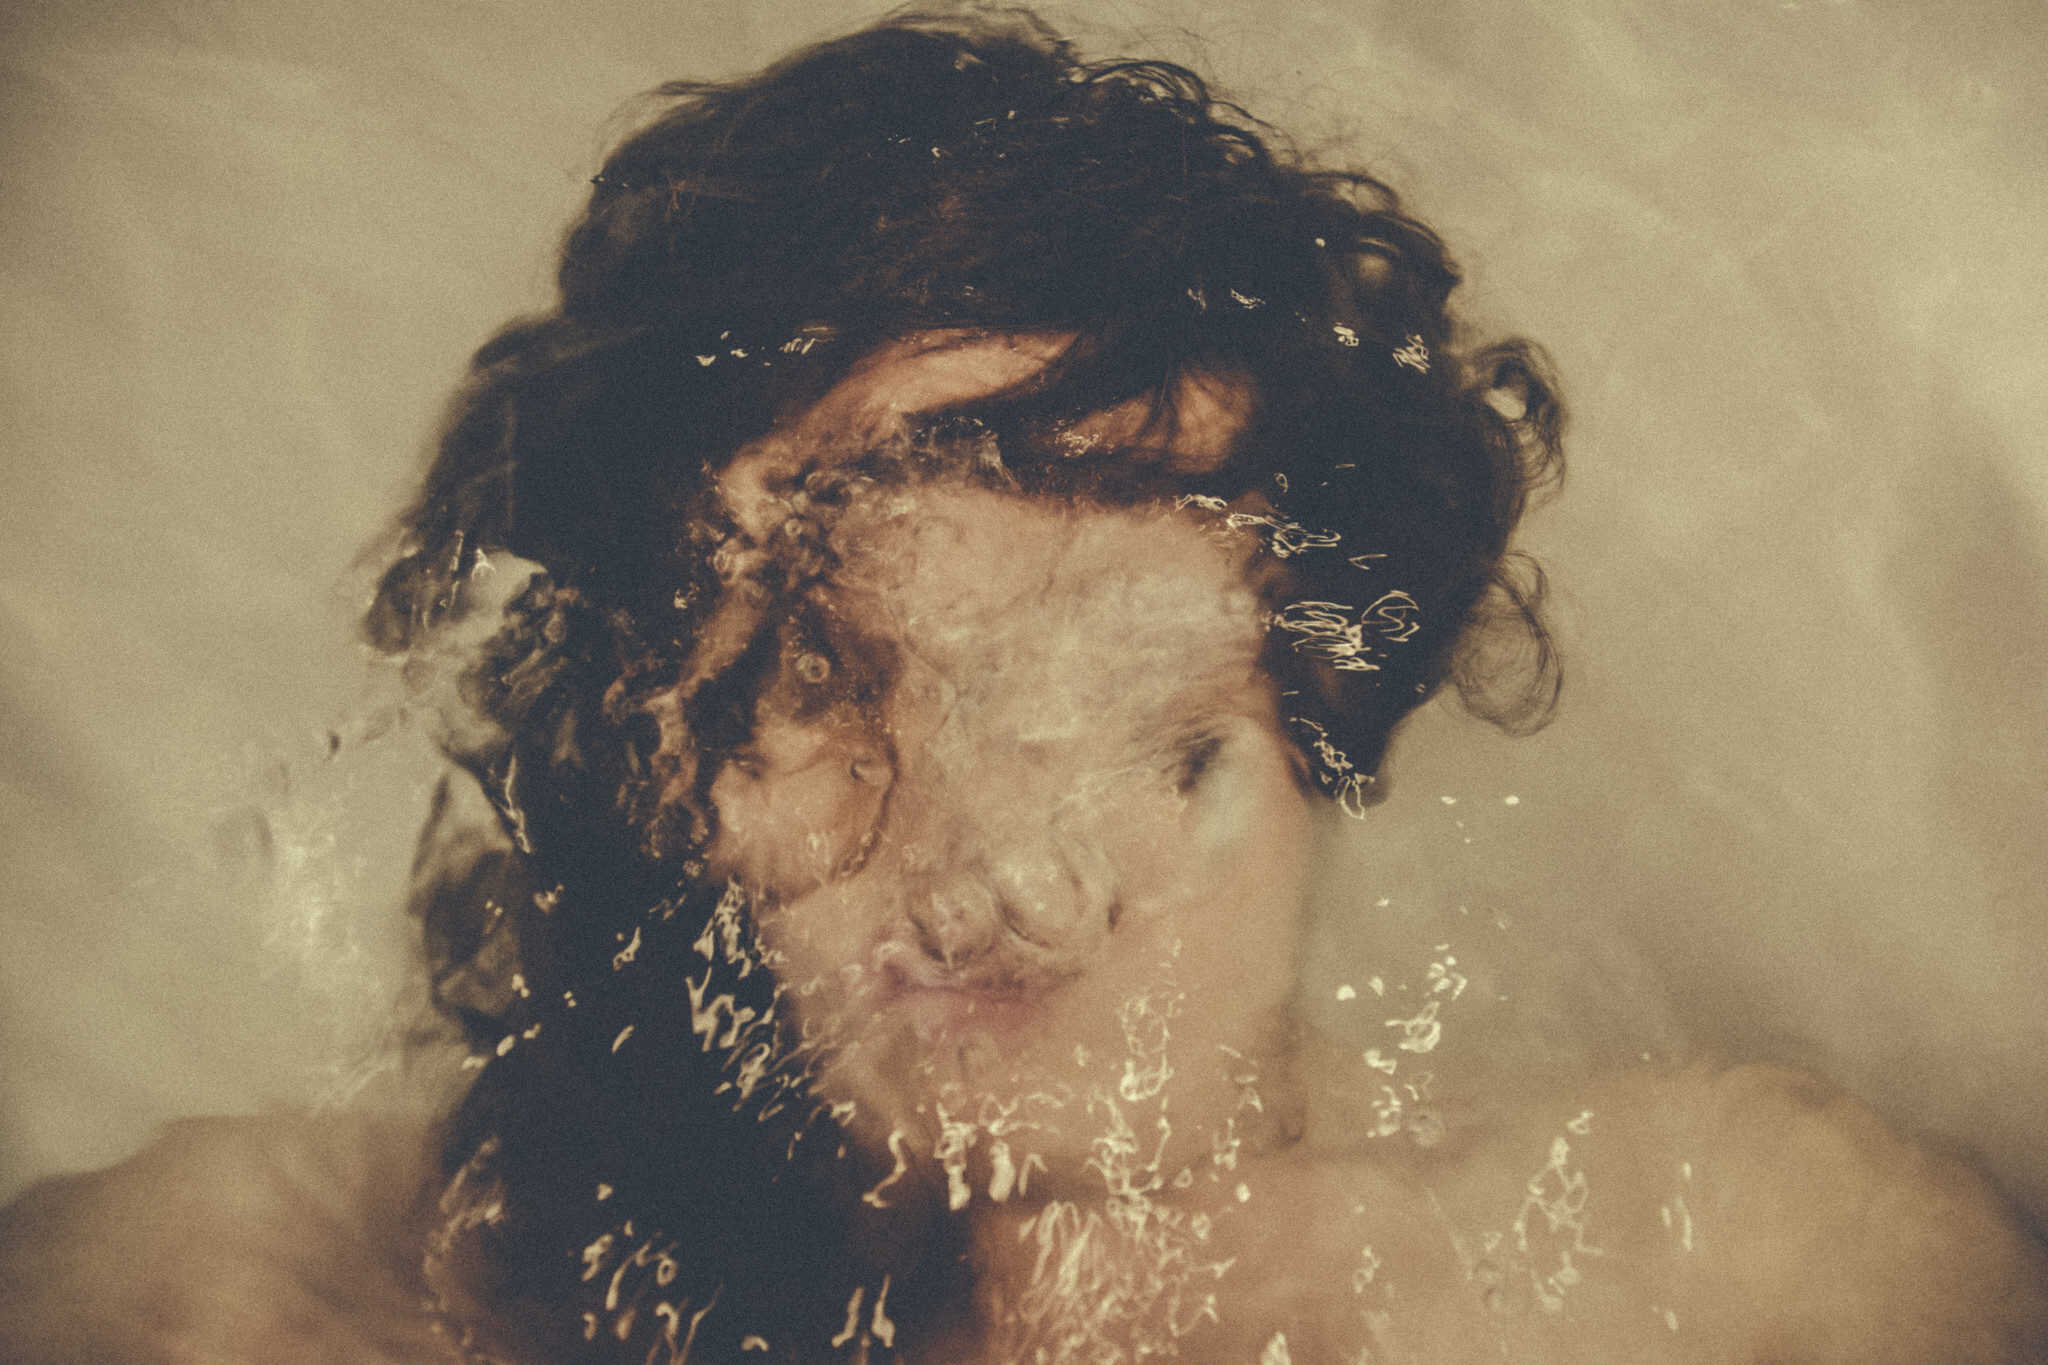 Woman's face underwater with bubbles from her breathing blurry and obscuring her face to represent anxiety